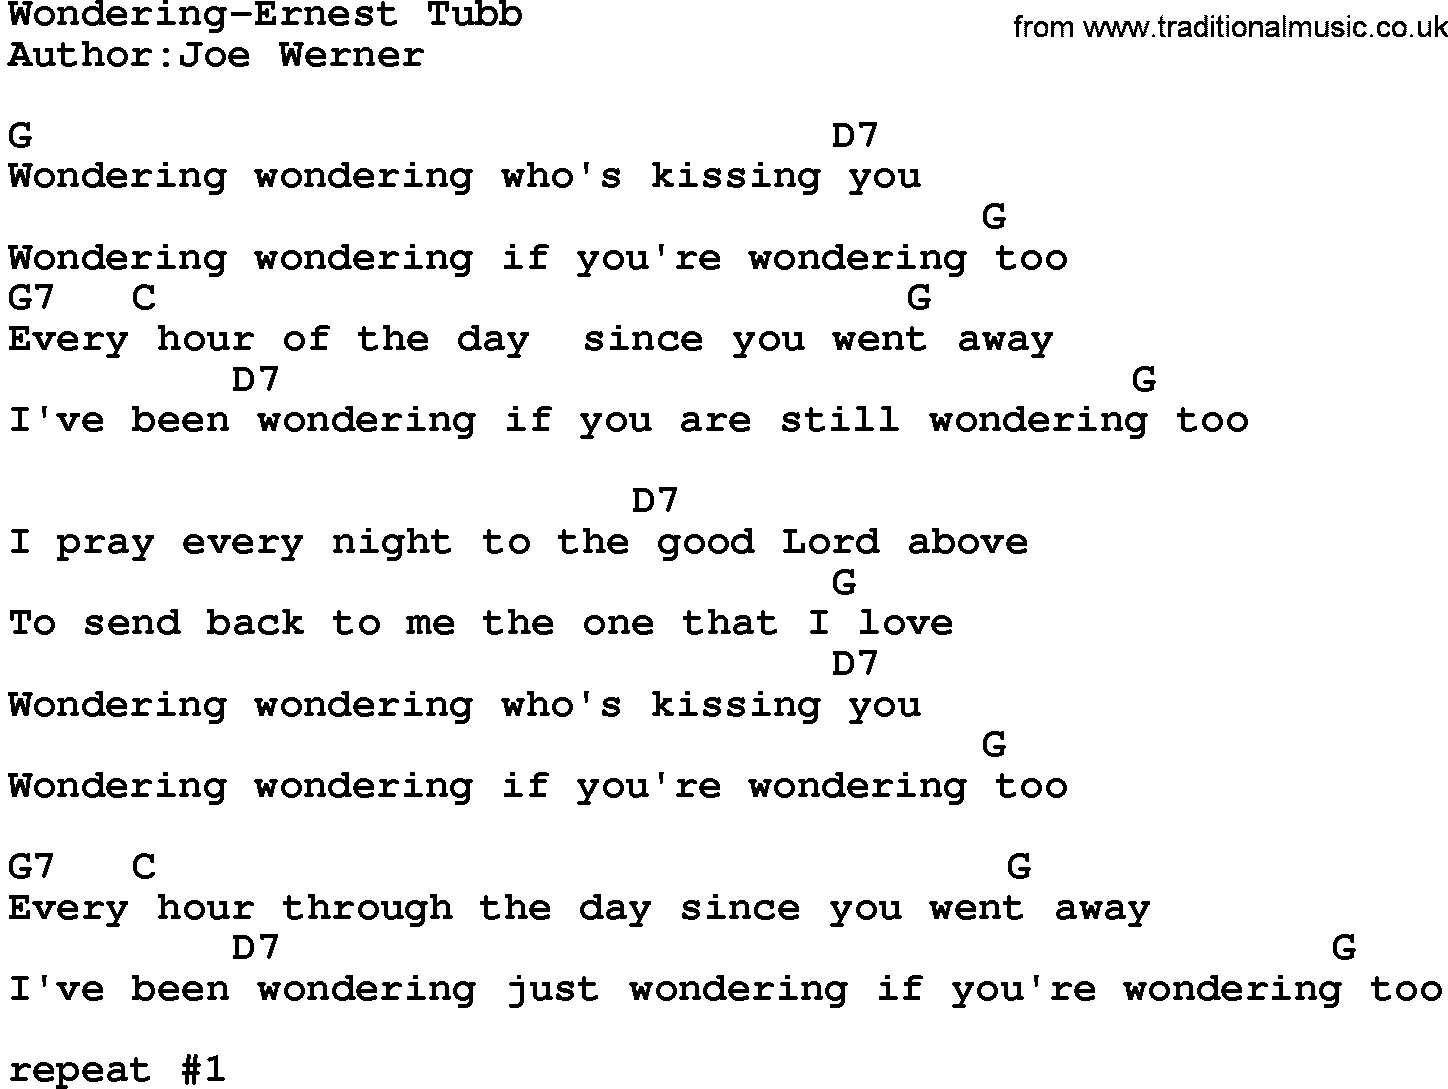 Country music song: Wondering-Ernest Tubb  lyrics and chords